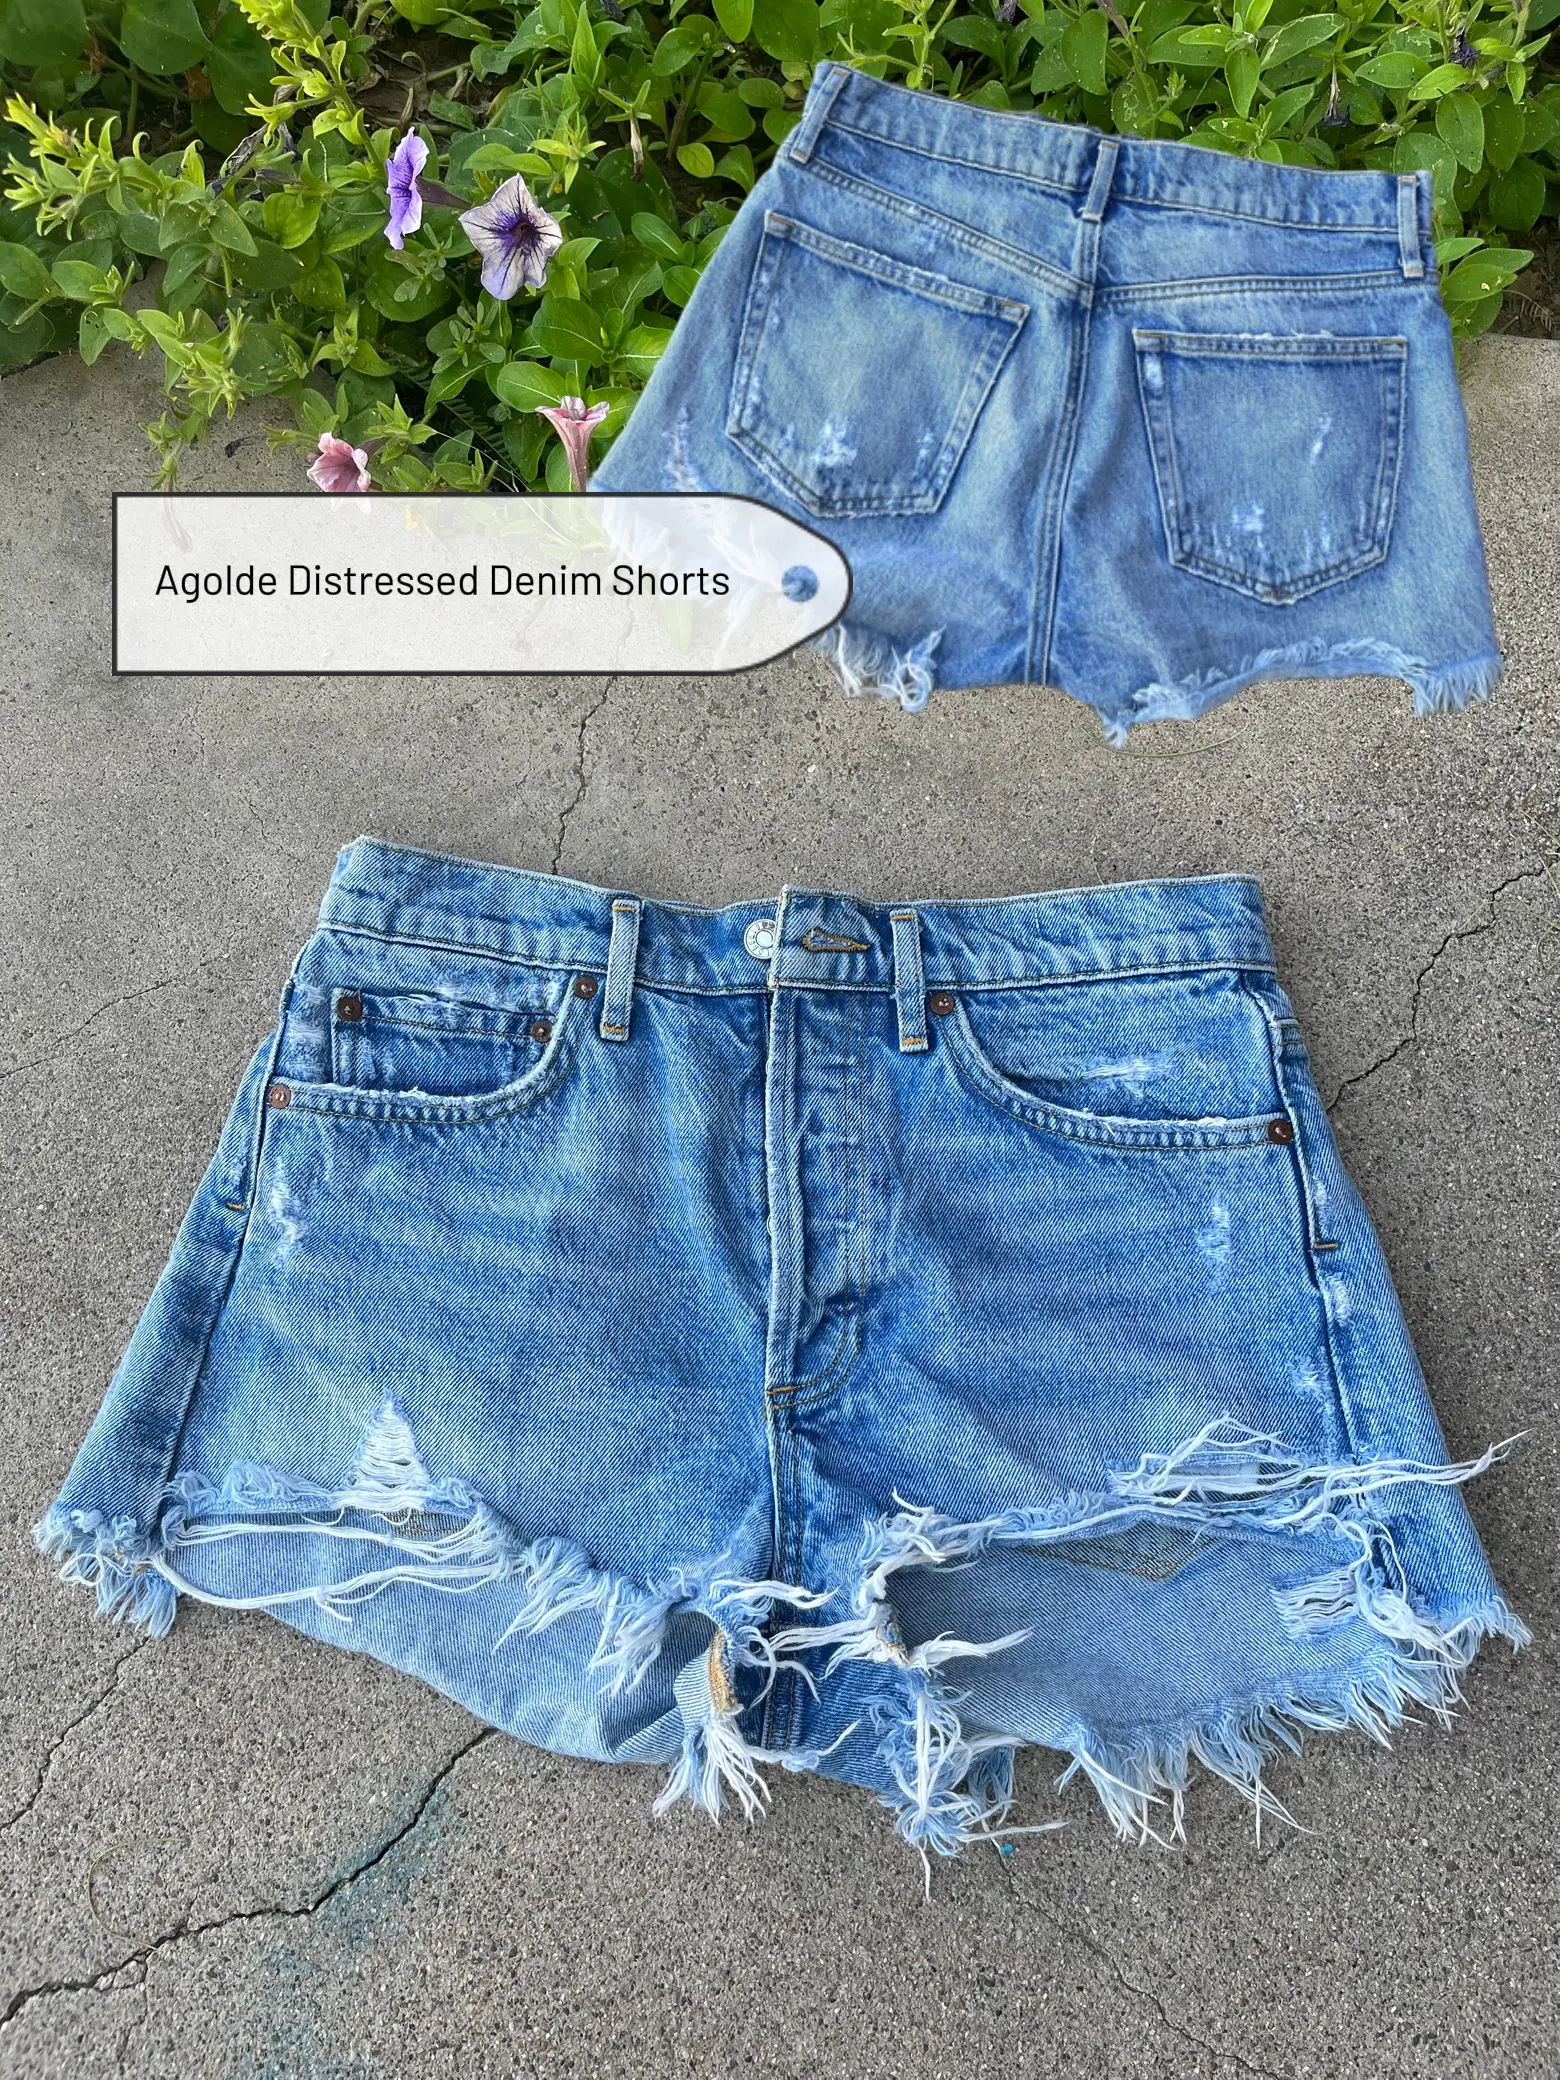 American Eagle Super Stretch Super High Rose Shortie Jean Shorts Blue Size  6 - $14 - From Emily